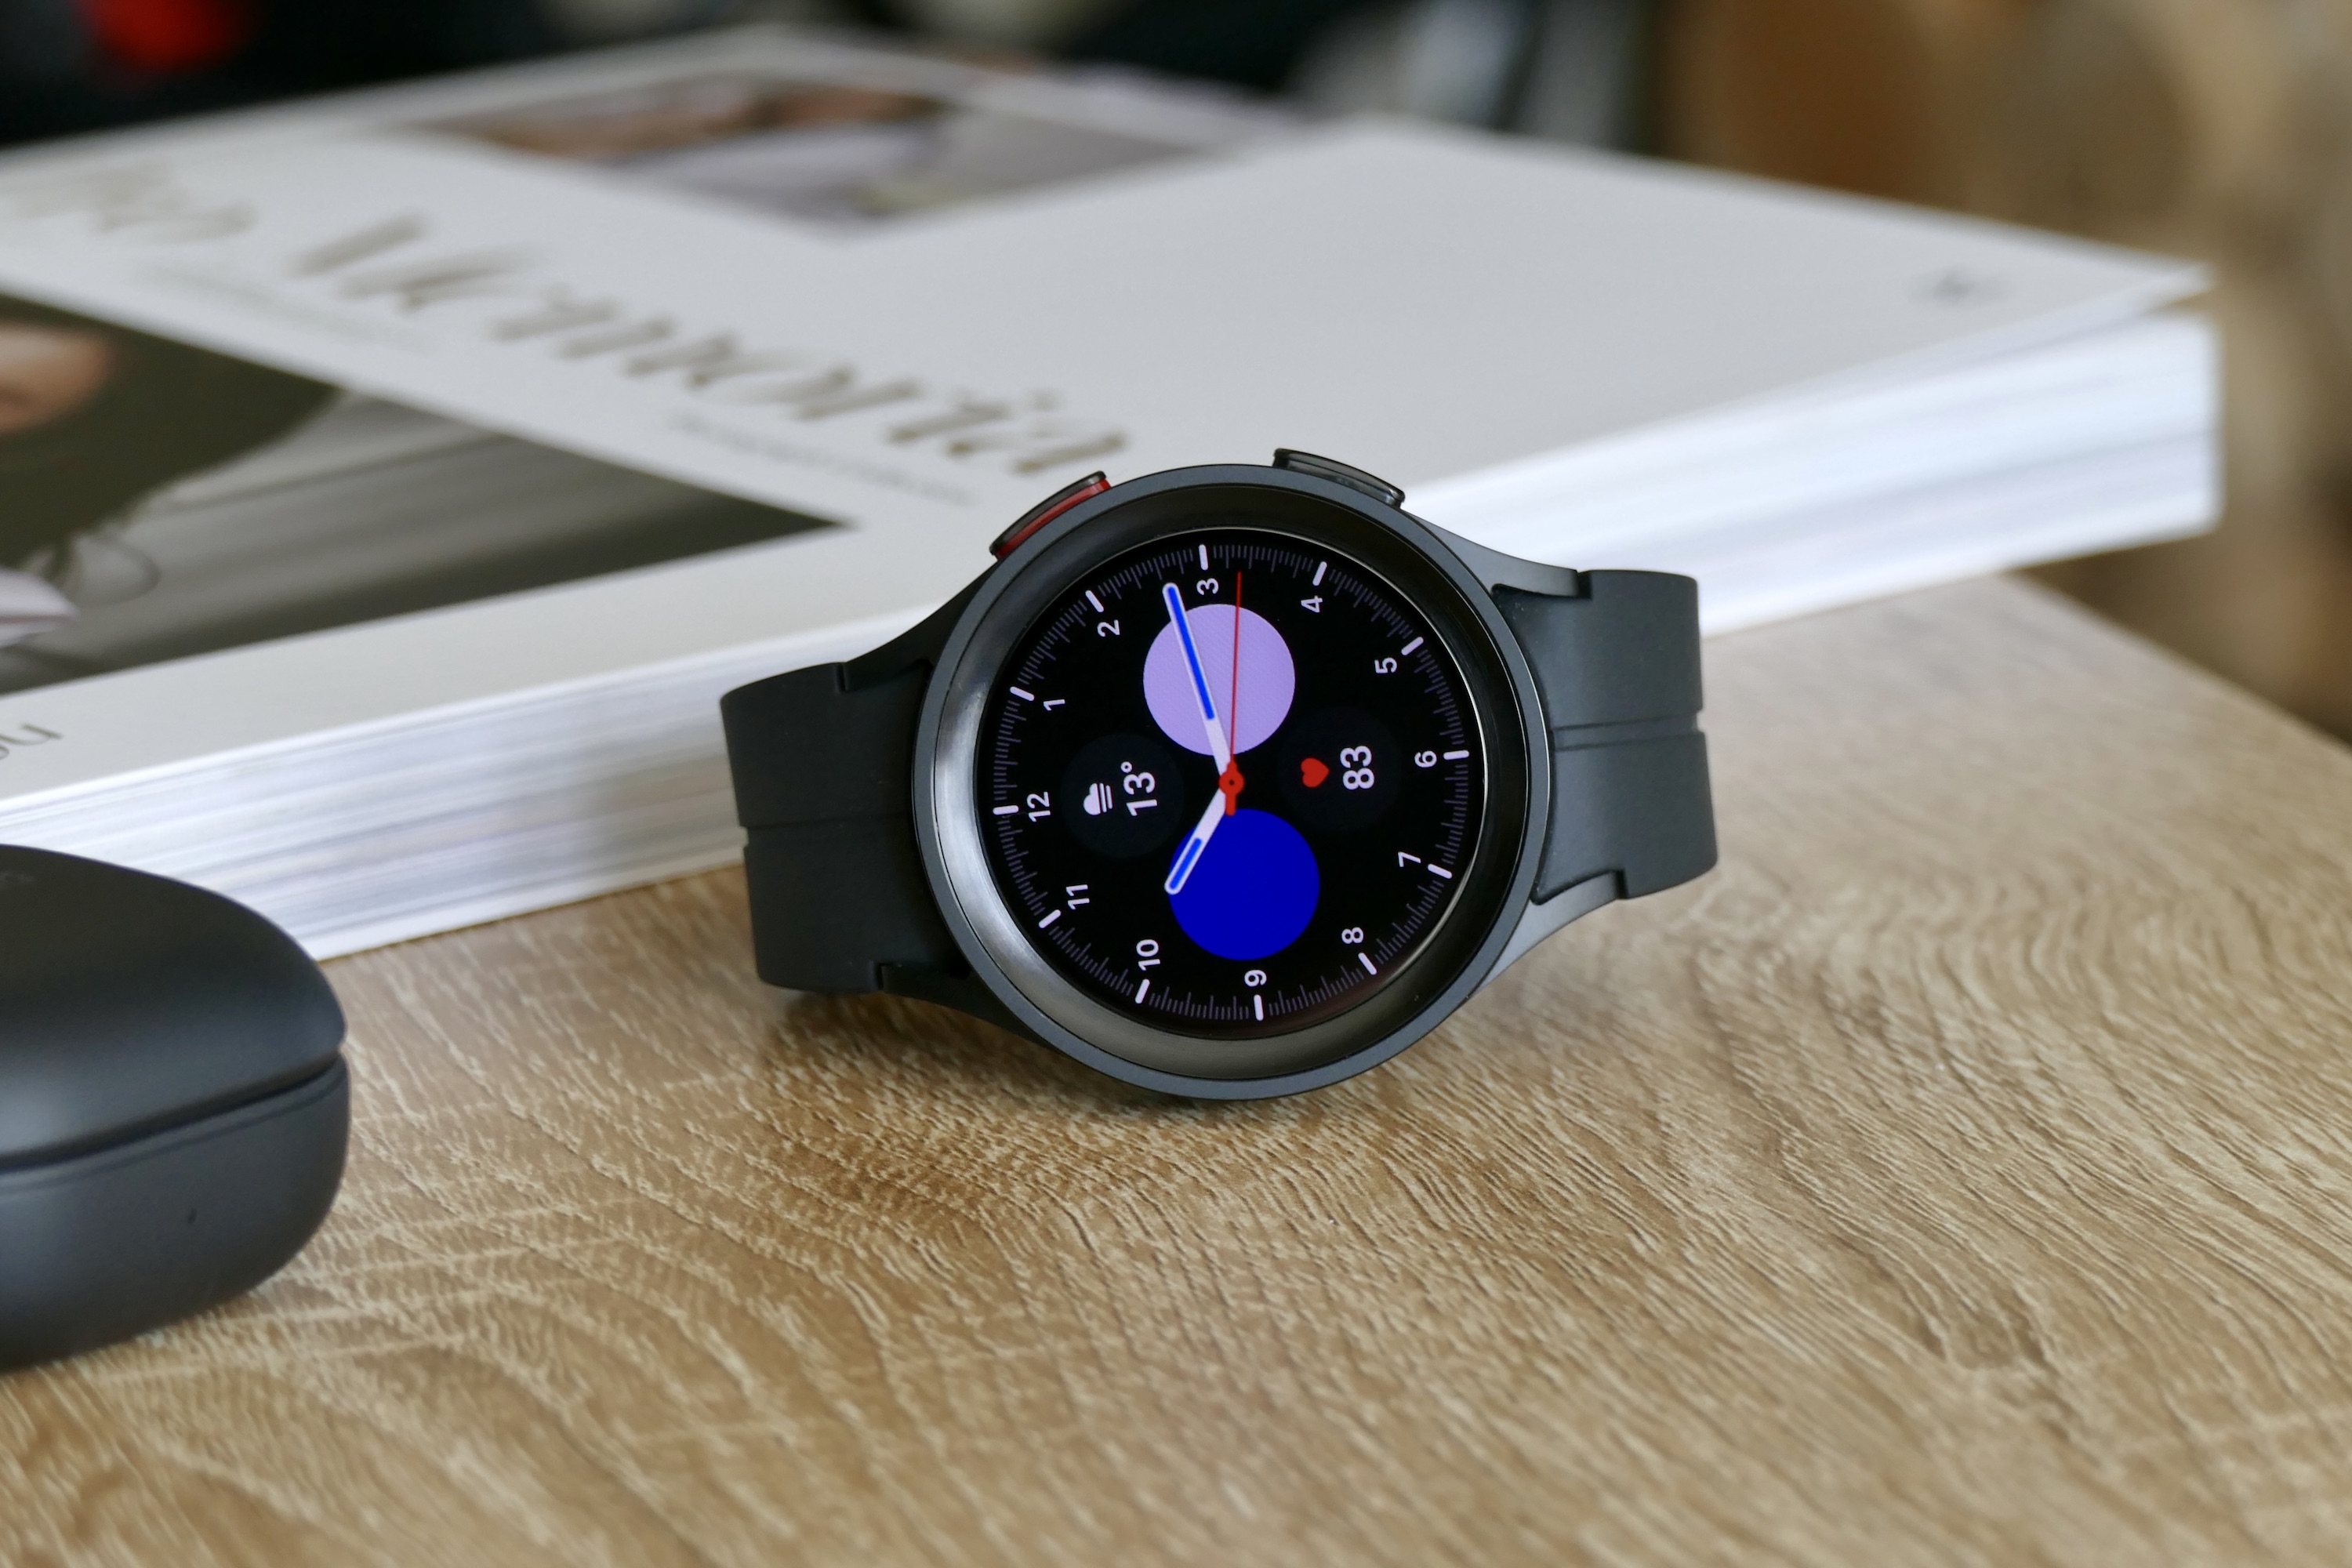 The Galaxy Watch 5 Pro showing a classic watch face.